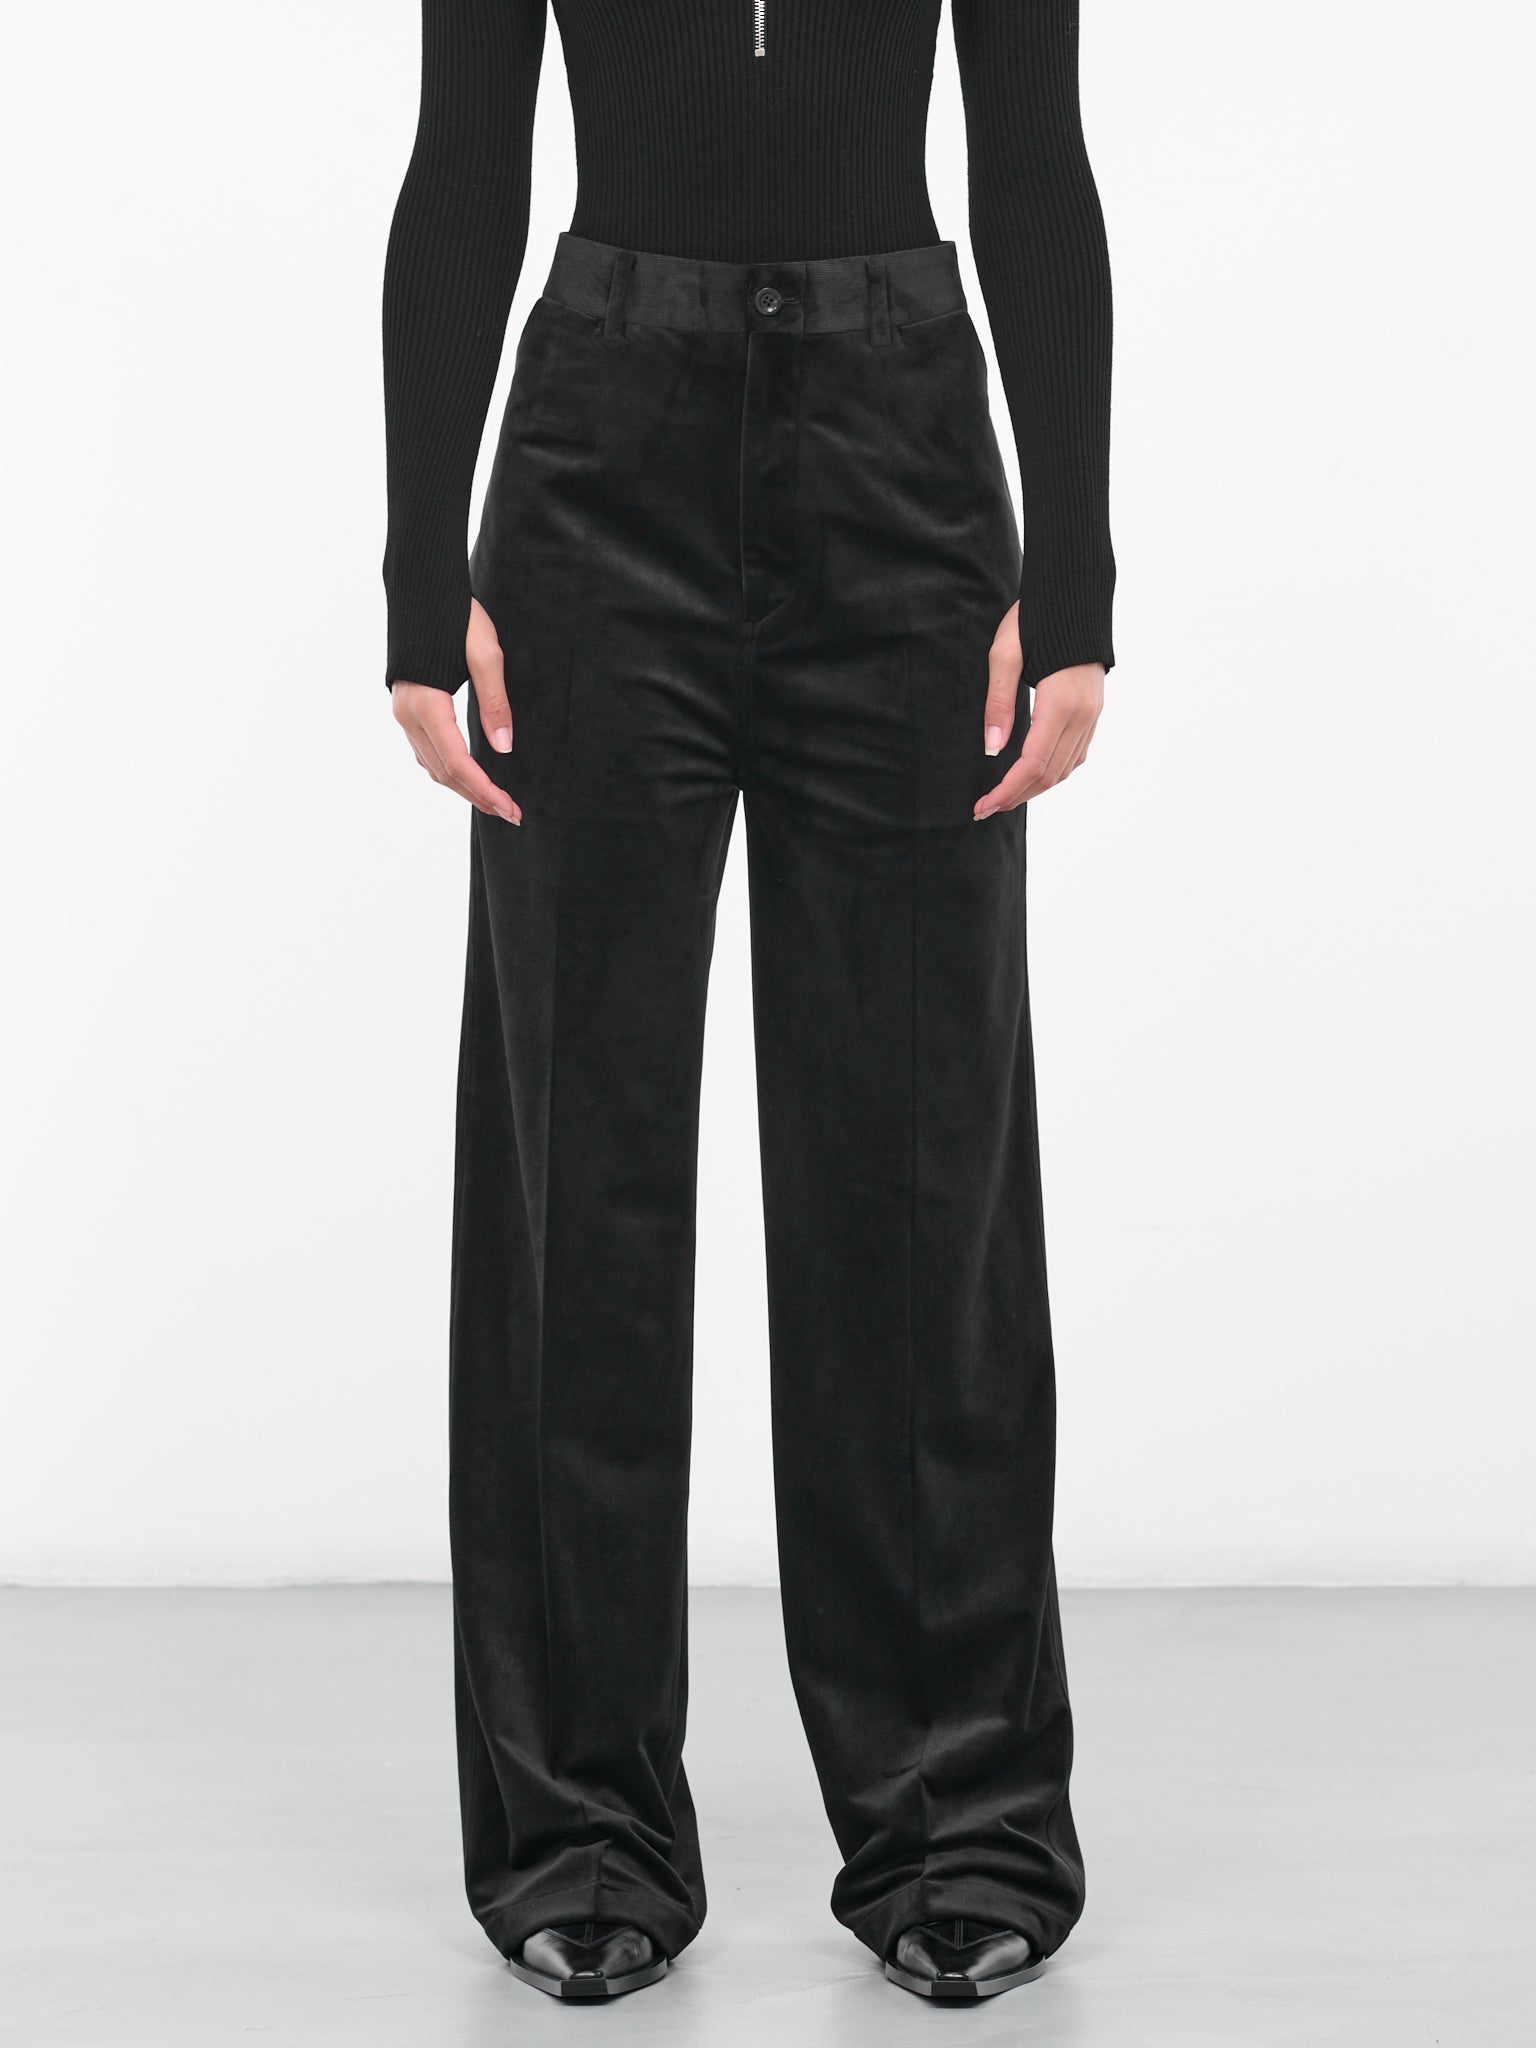 Inside Out Trousers (SY-P6C-BLACK)